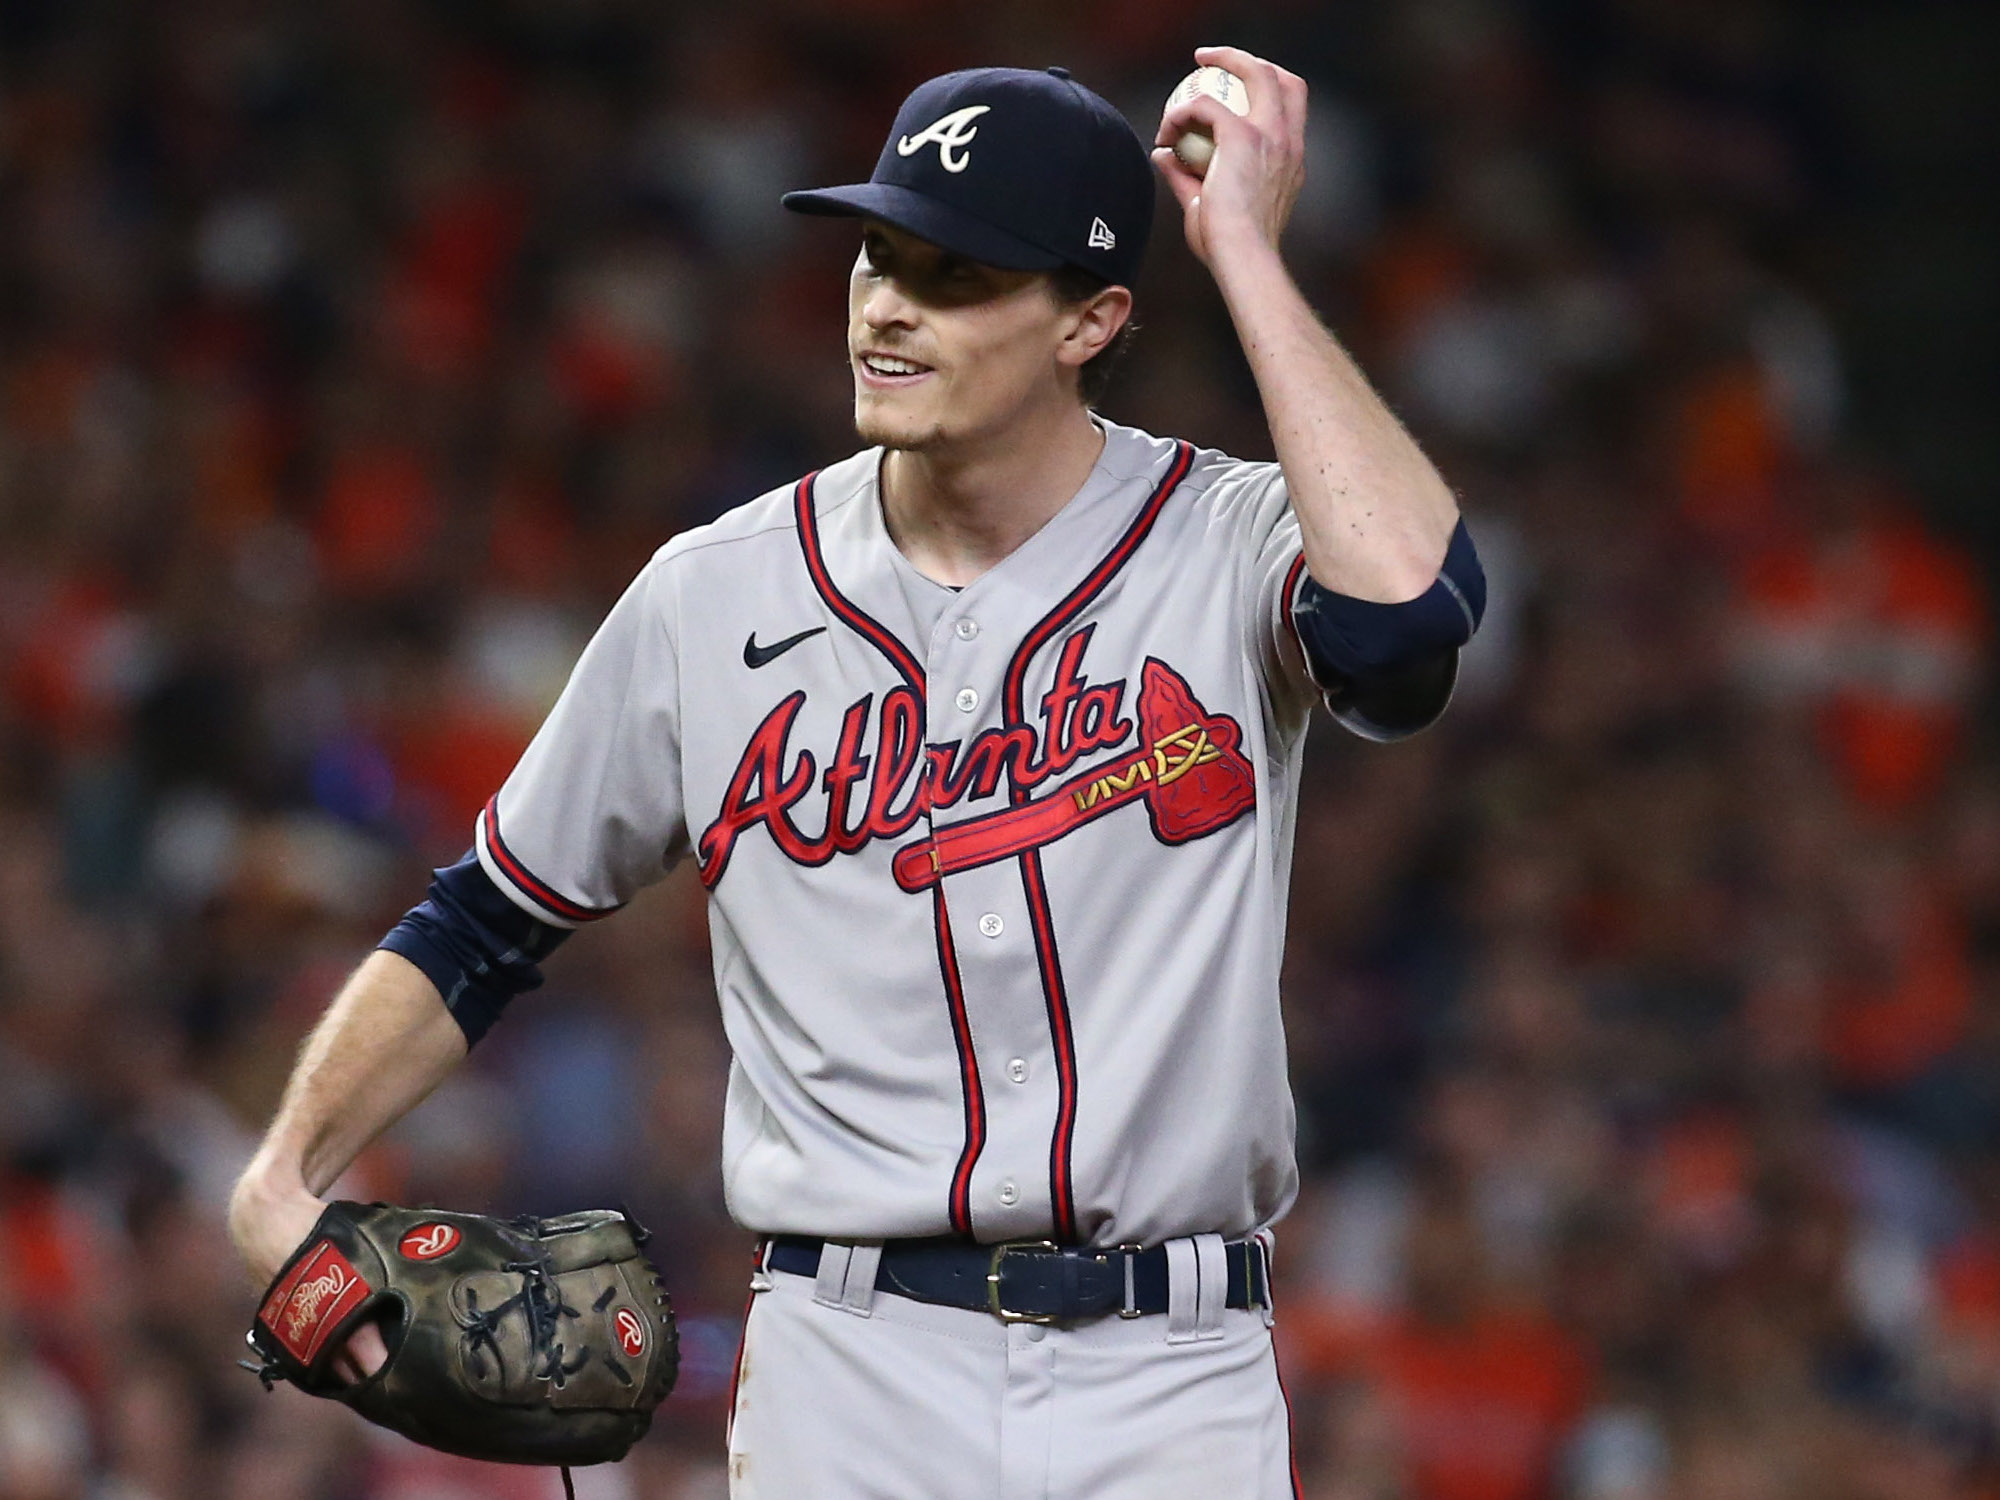 Atlanta Braves starting pitcher Max Fried reacts against the Houston Astros during the first inning in game six of the 2021 World Series at Minute Maid Park.